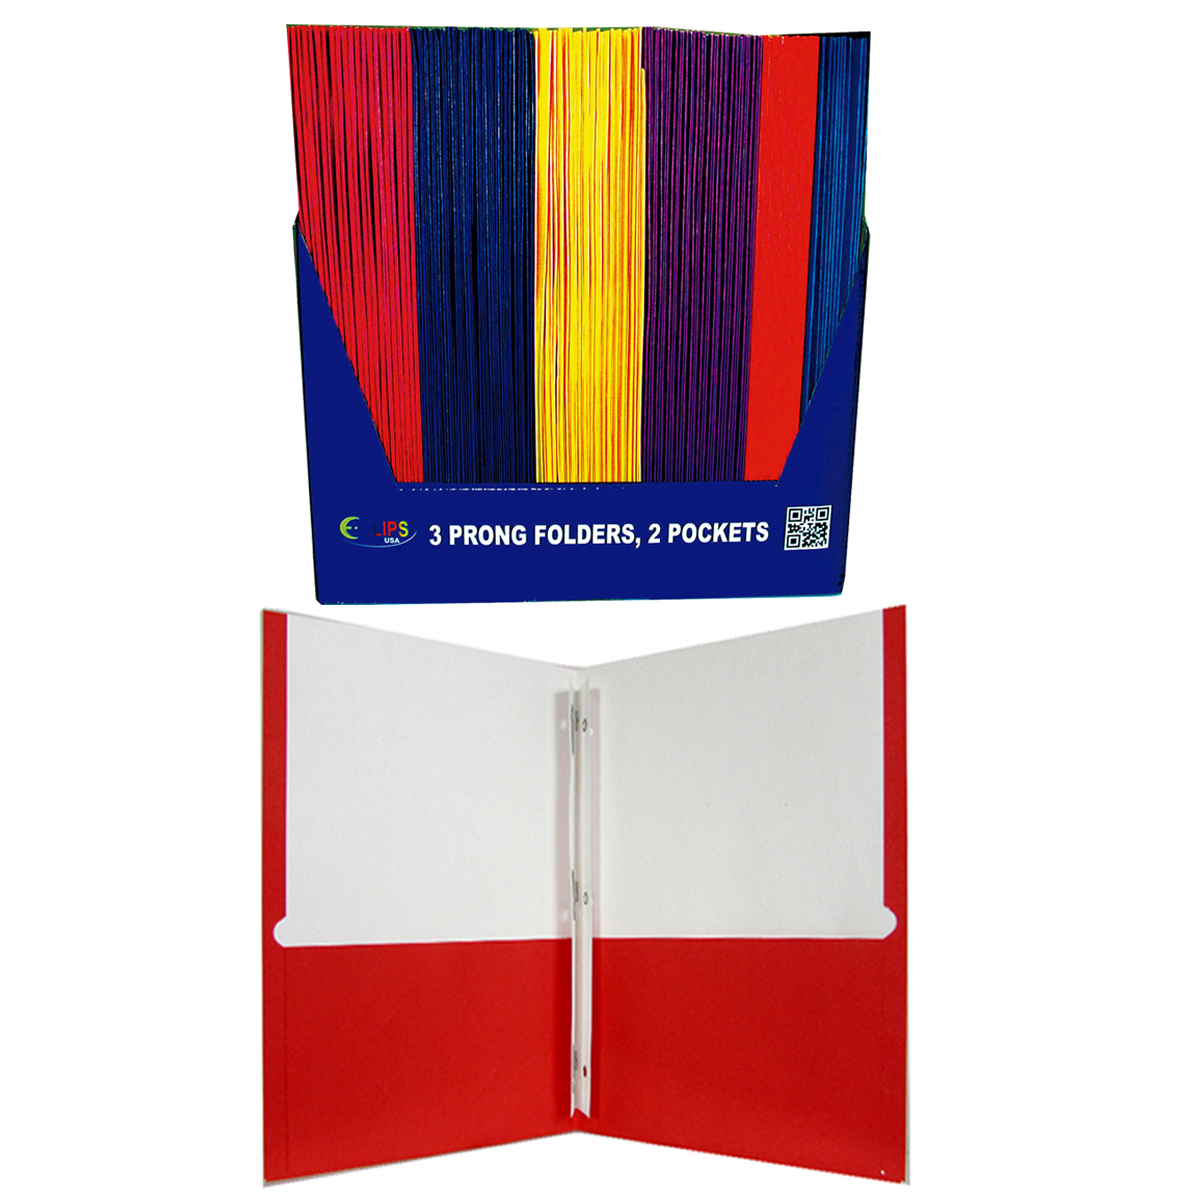 2-Pocket Folders w/ Prong Fasteners & Display - Assorted Colors